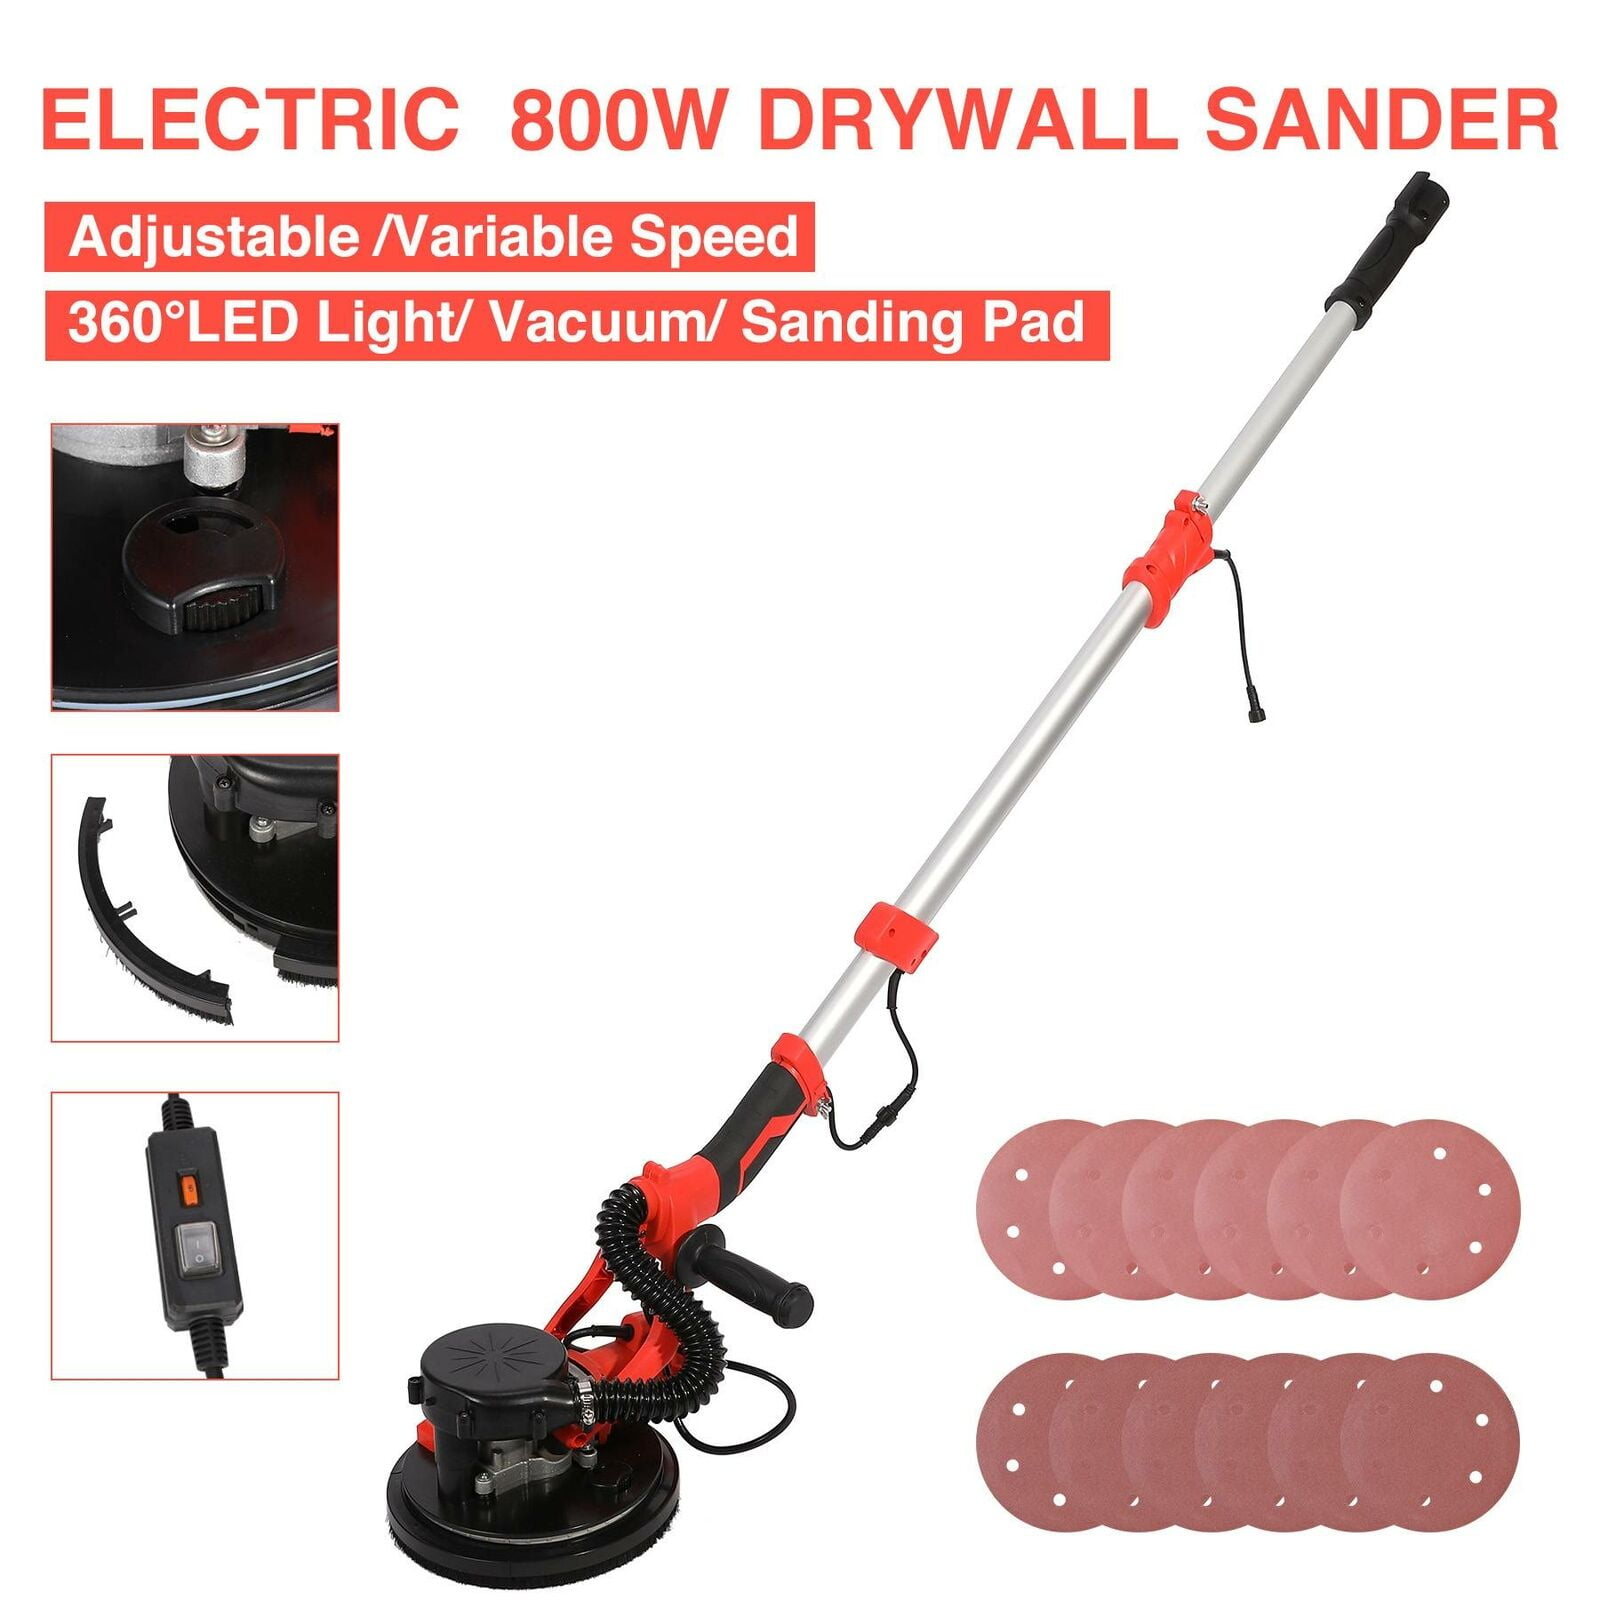 Adjustable Variable Speed 800W Commercial Electric Drywall Sander Sanding Pad 